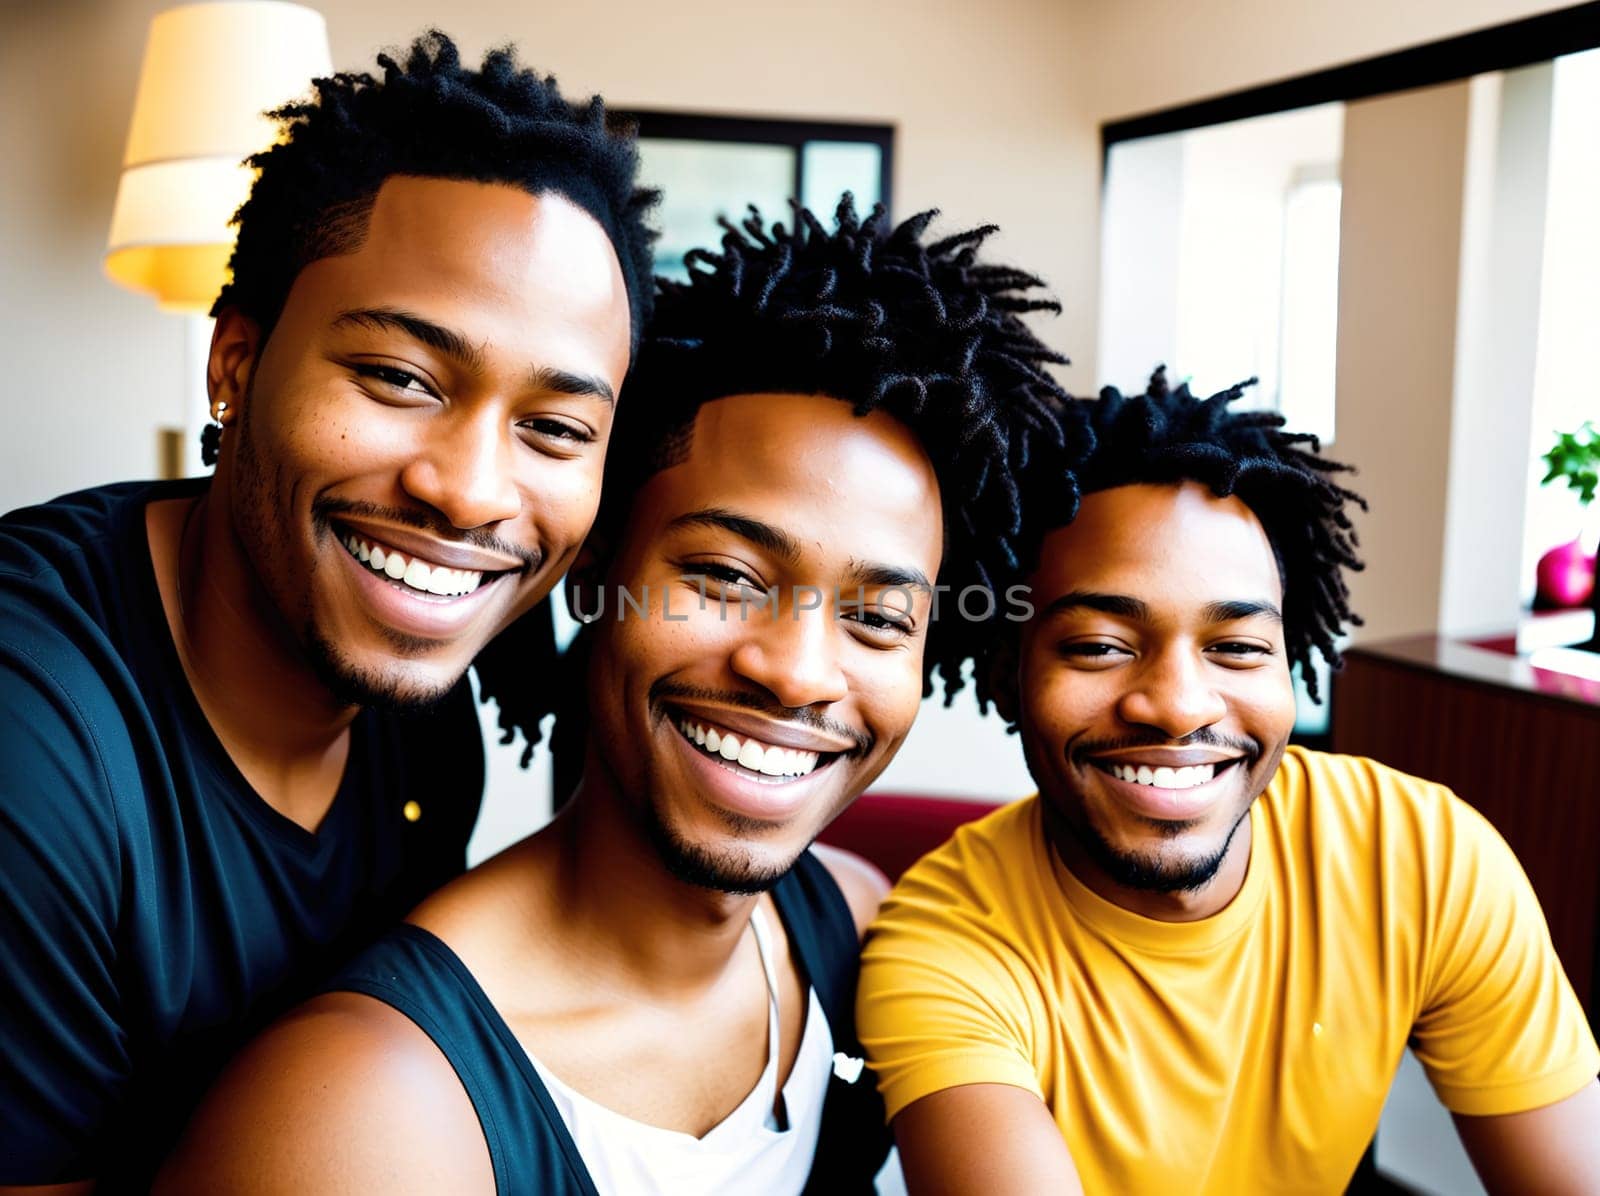 Three young men smiling and posing for a photo. by creart